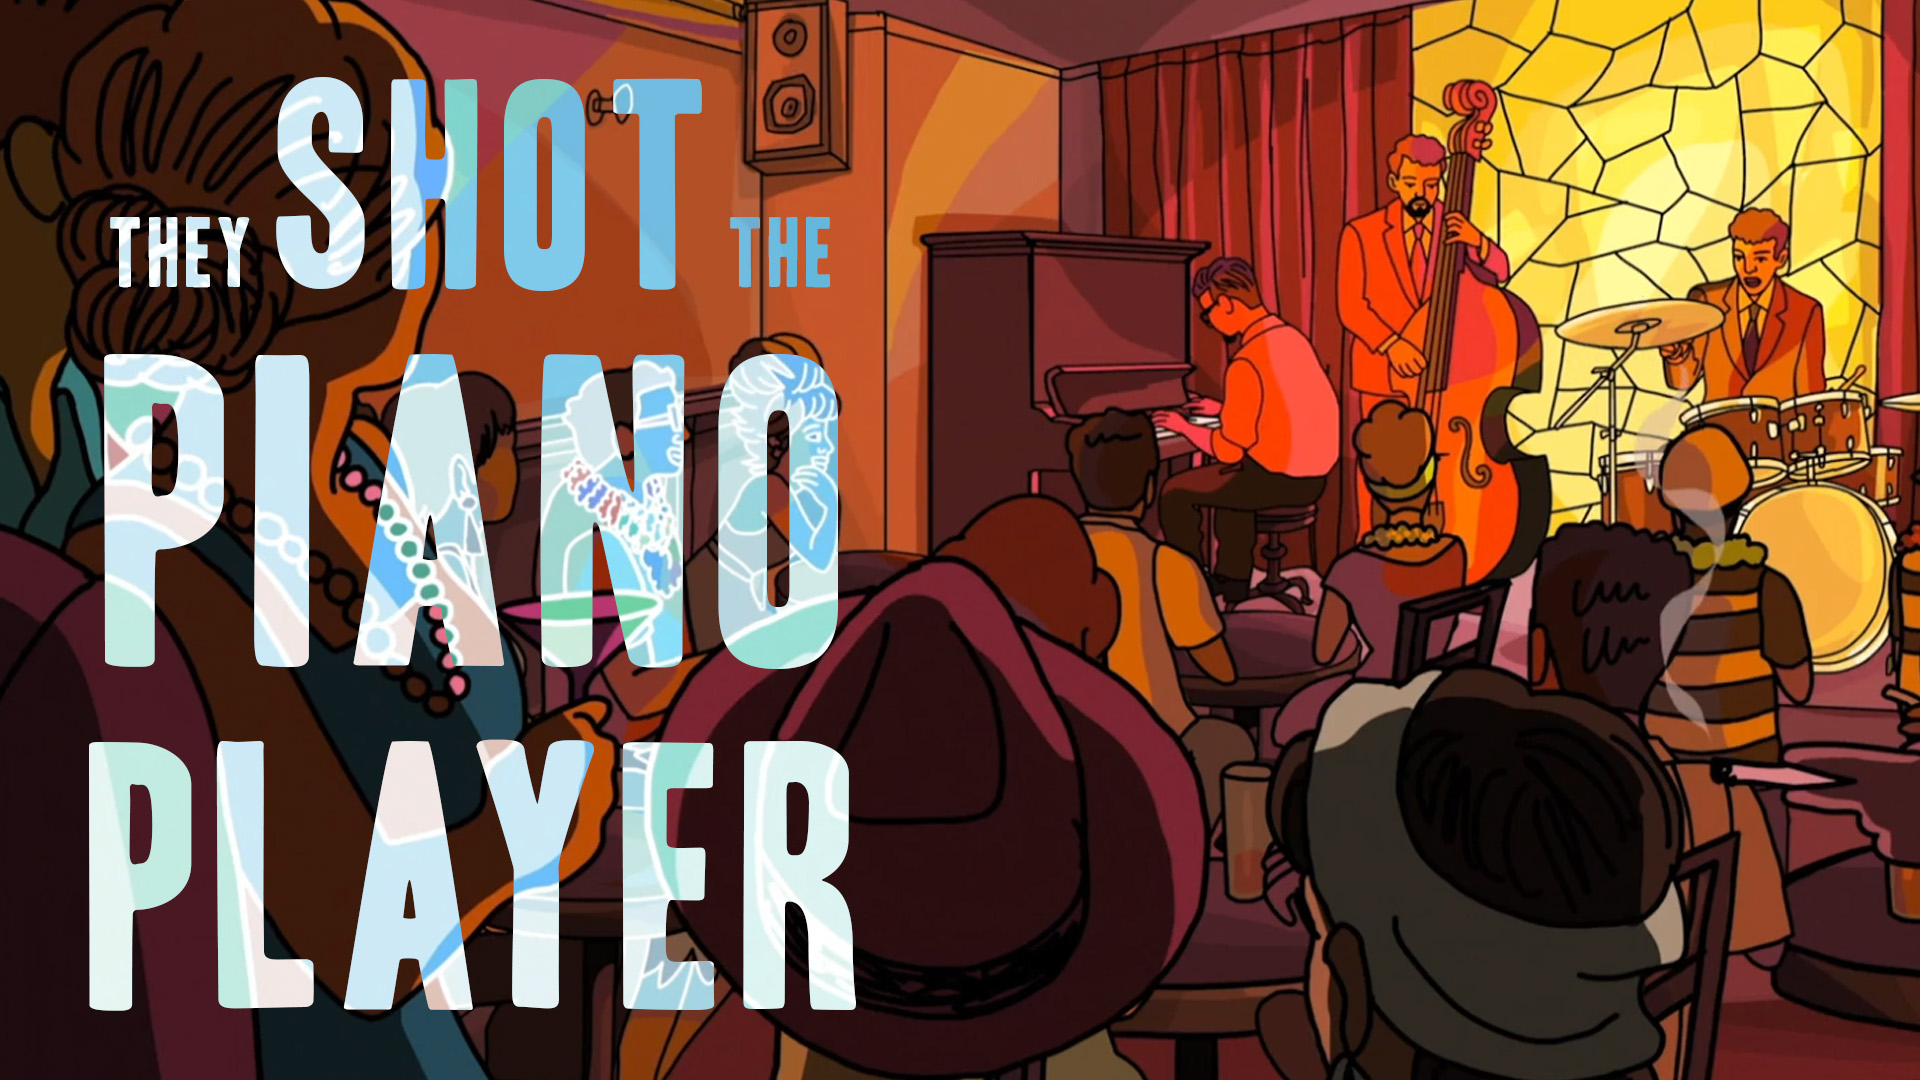 001 they shot the piano player